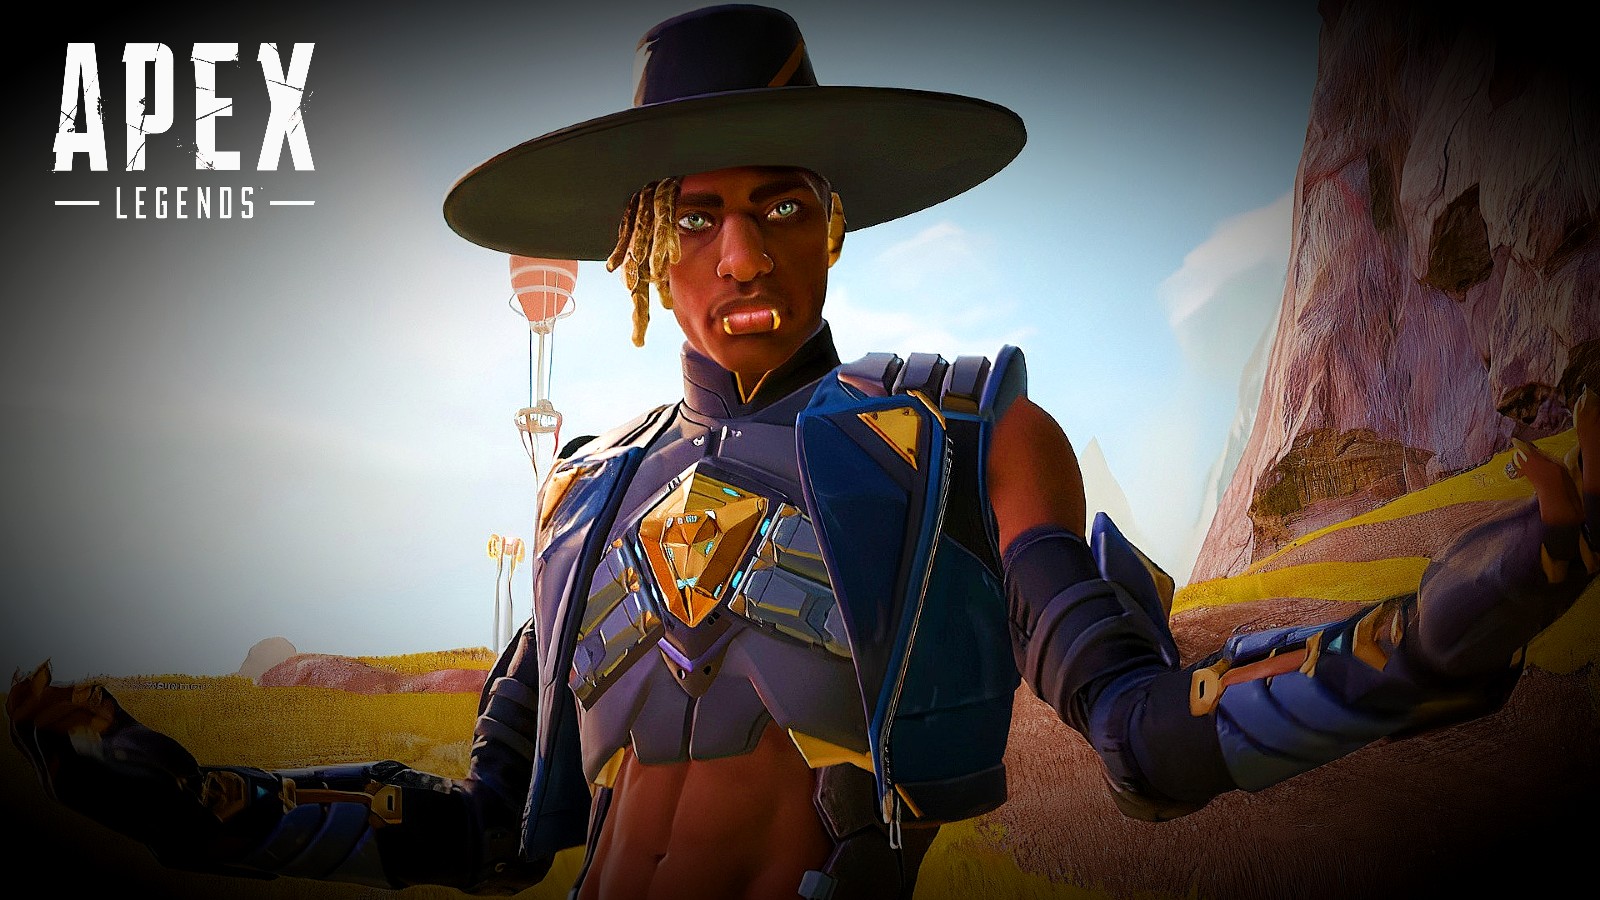 Seer was a huge hit at the Apex Legends Dressed to Kill event